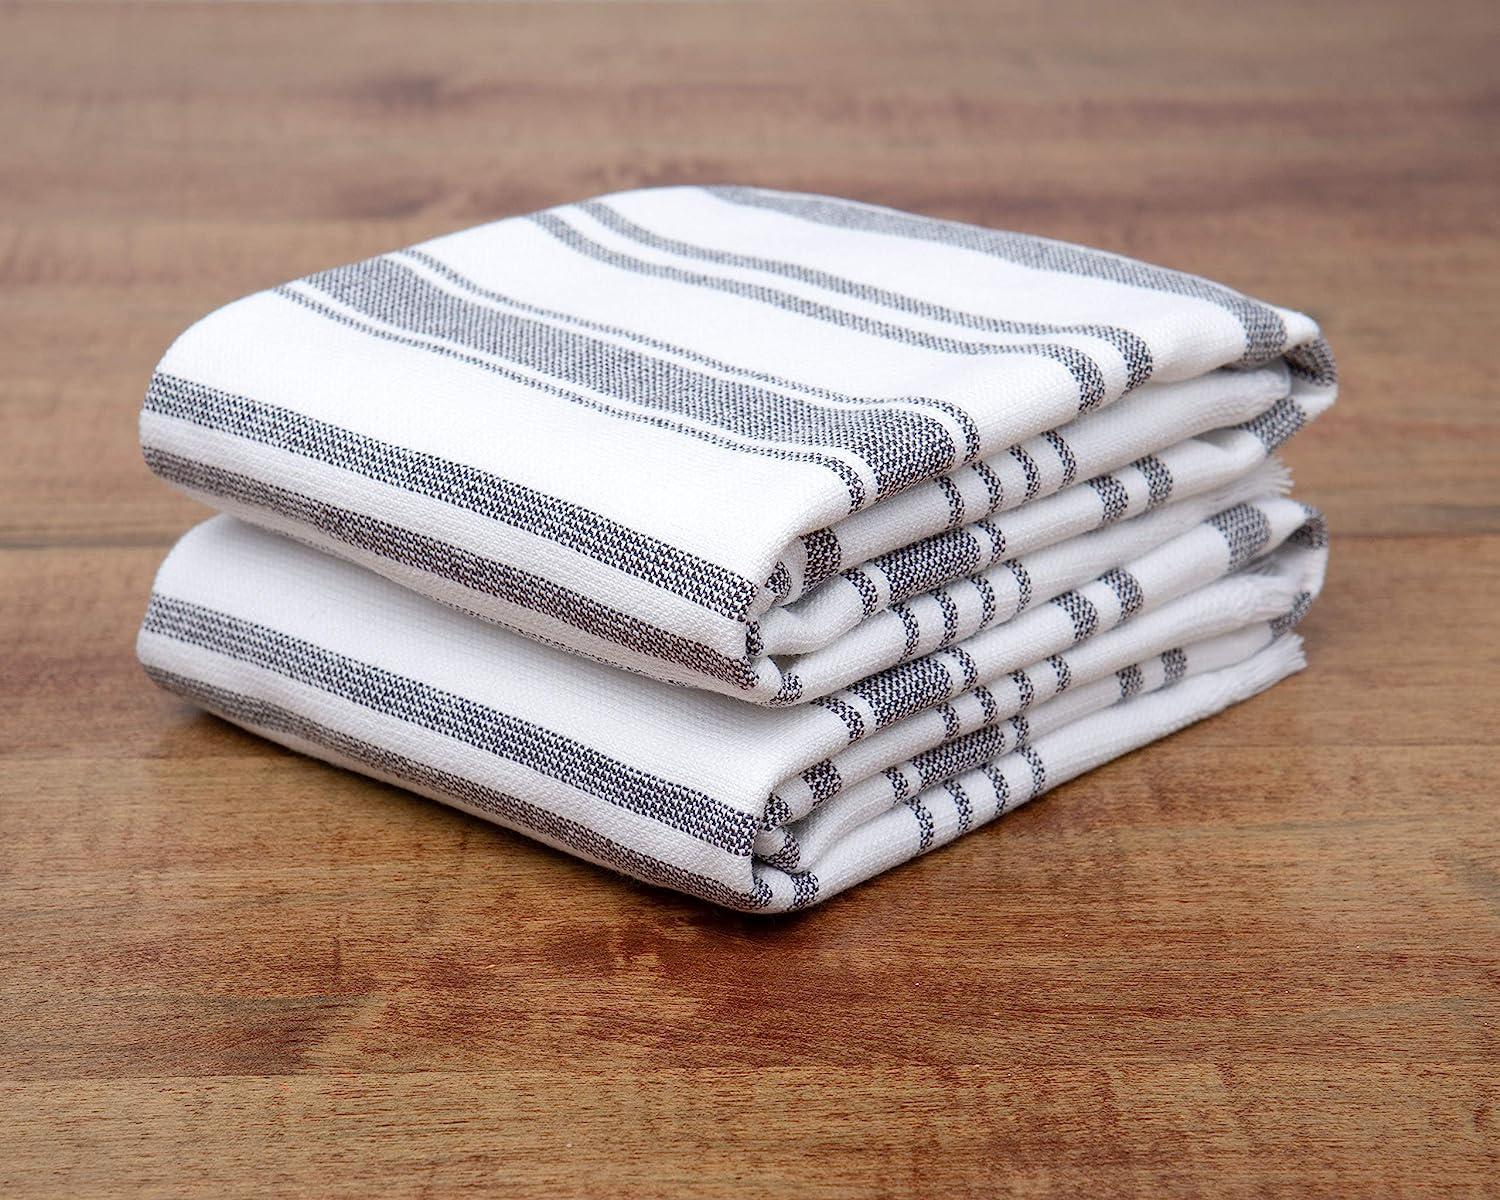 Sticky Toffee Cotton White Hand Towels Set for Bathroom, Soft and Absorbent  Decorative Bath Hand Towels, Modern Gray Striped Towels, Oeko-Tex Cotton,  Reusable and Quick Drying, 28 in x 16 in Hand